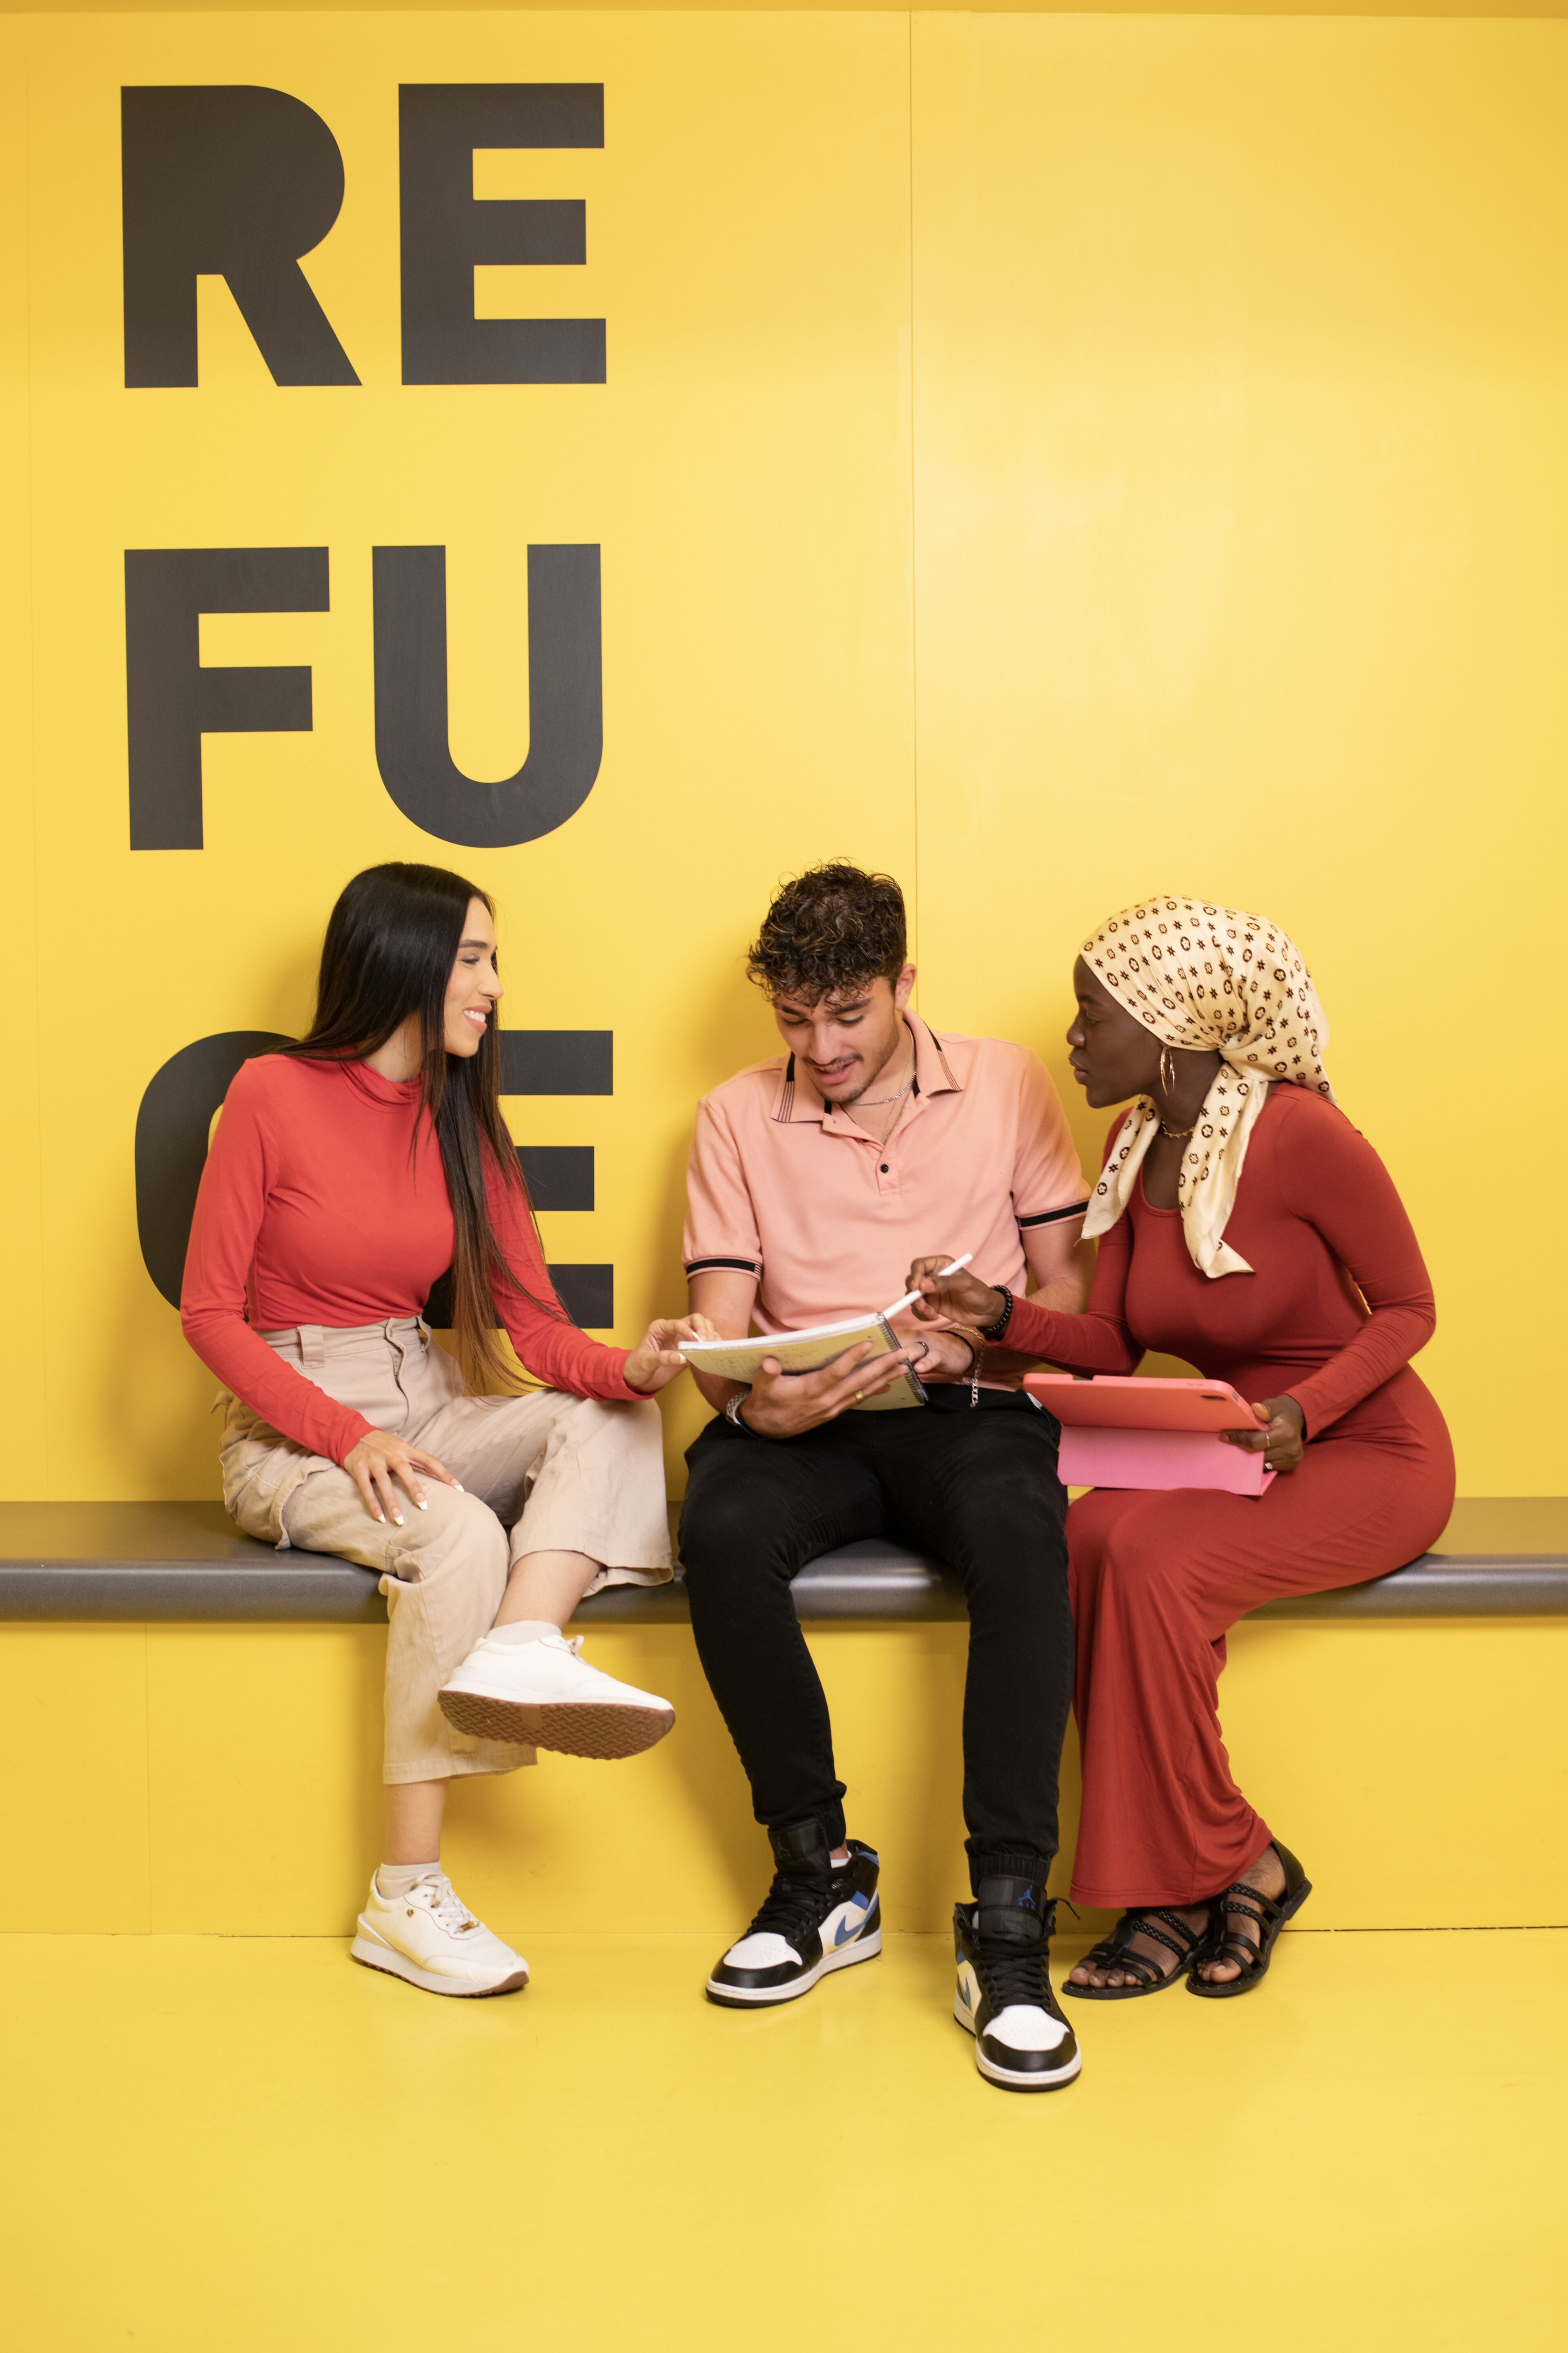 Three peers share ideas in an animated discussion, framed by a bold yellow wall that evokes energy and creativity.